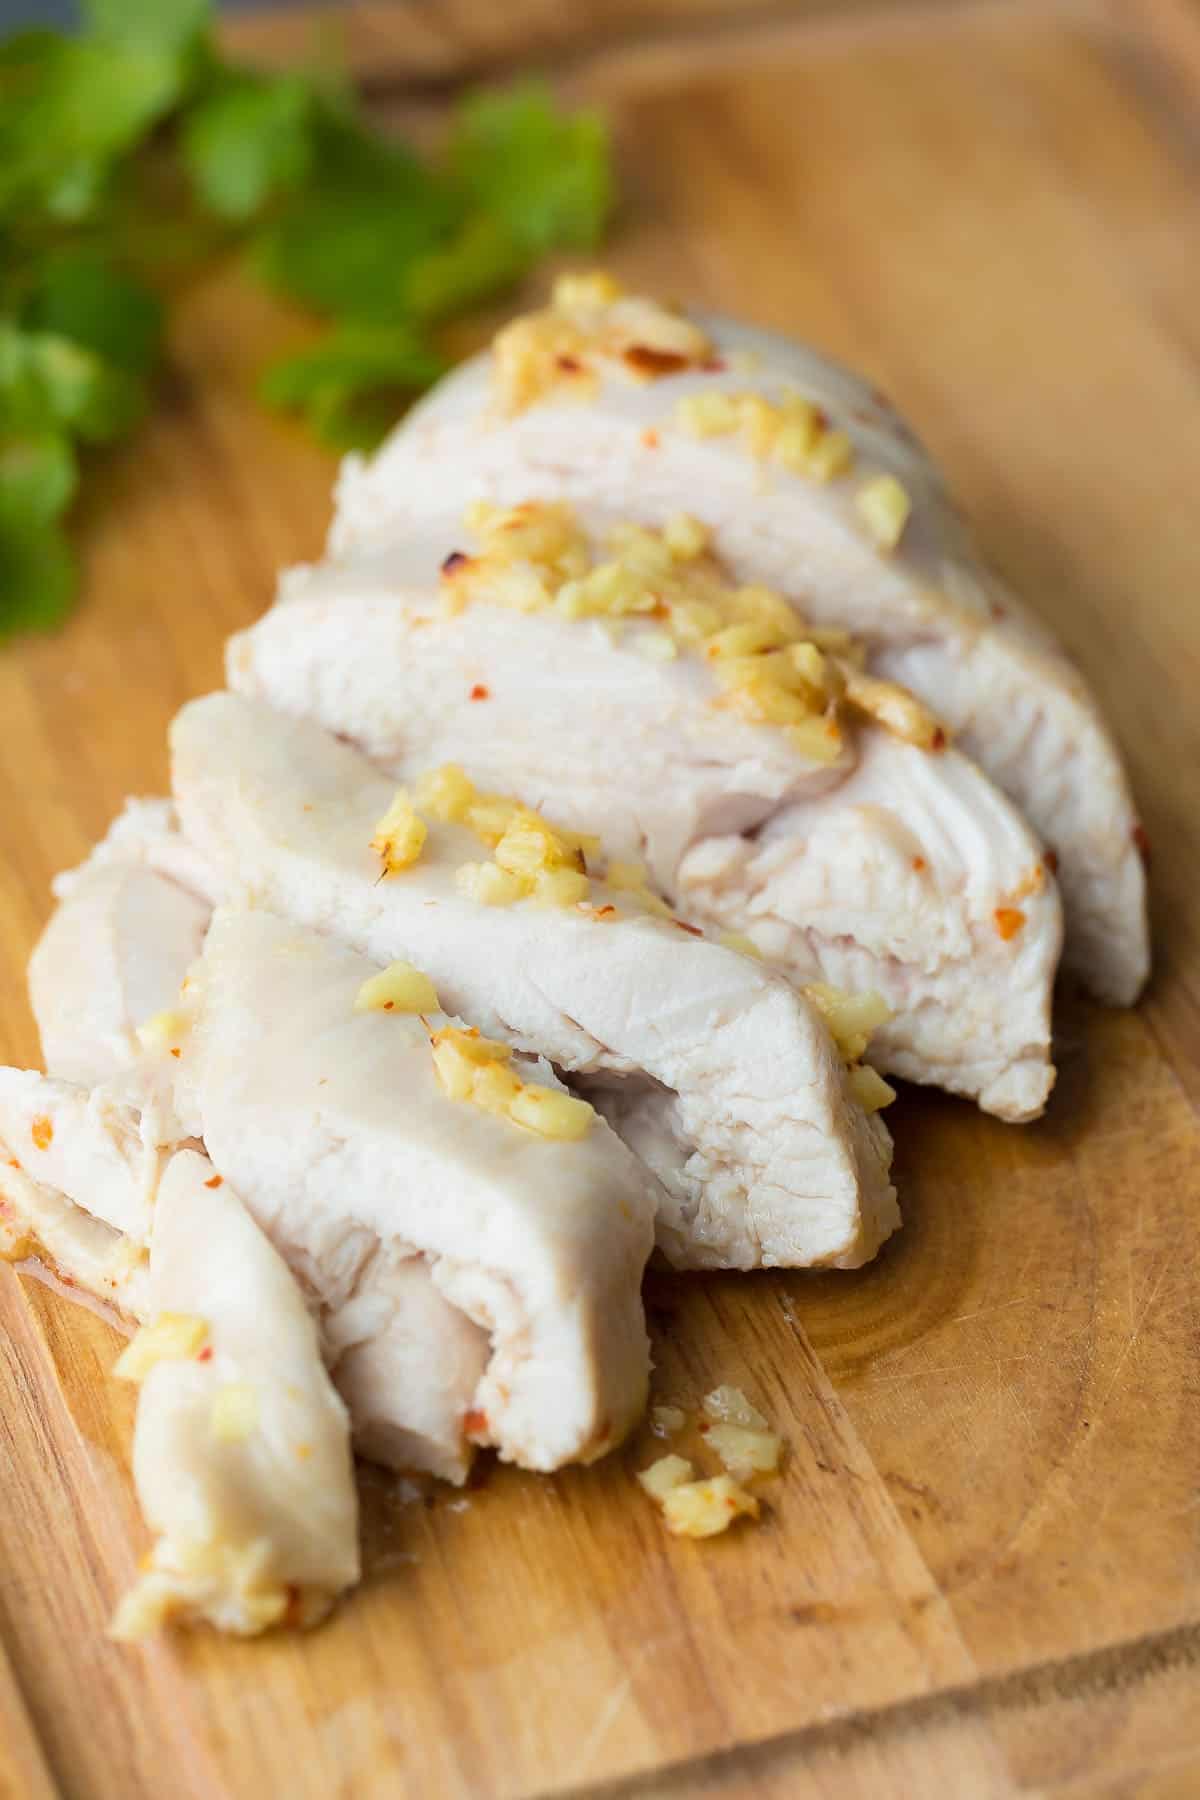 Ginger and lemon chicken marinade on sliced chicken on cutting board